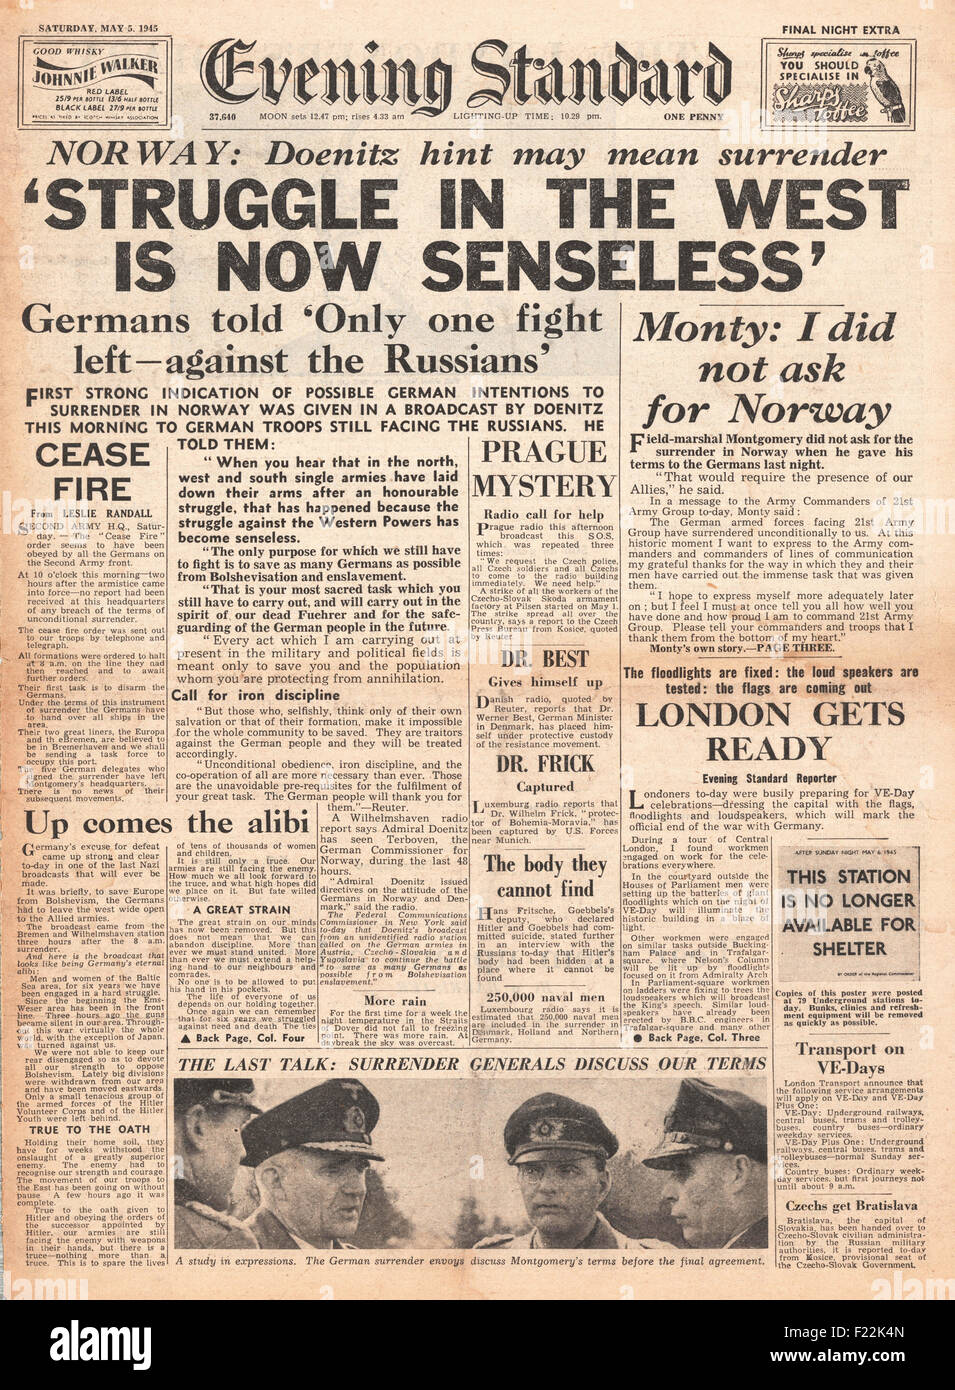 1945 Evening Standard (London) front page reporting Germany Surrenders in Denmark, Holland and N. W. Germany Stock Photo